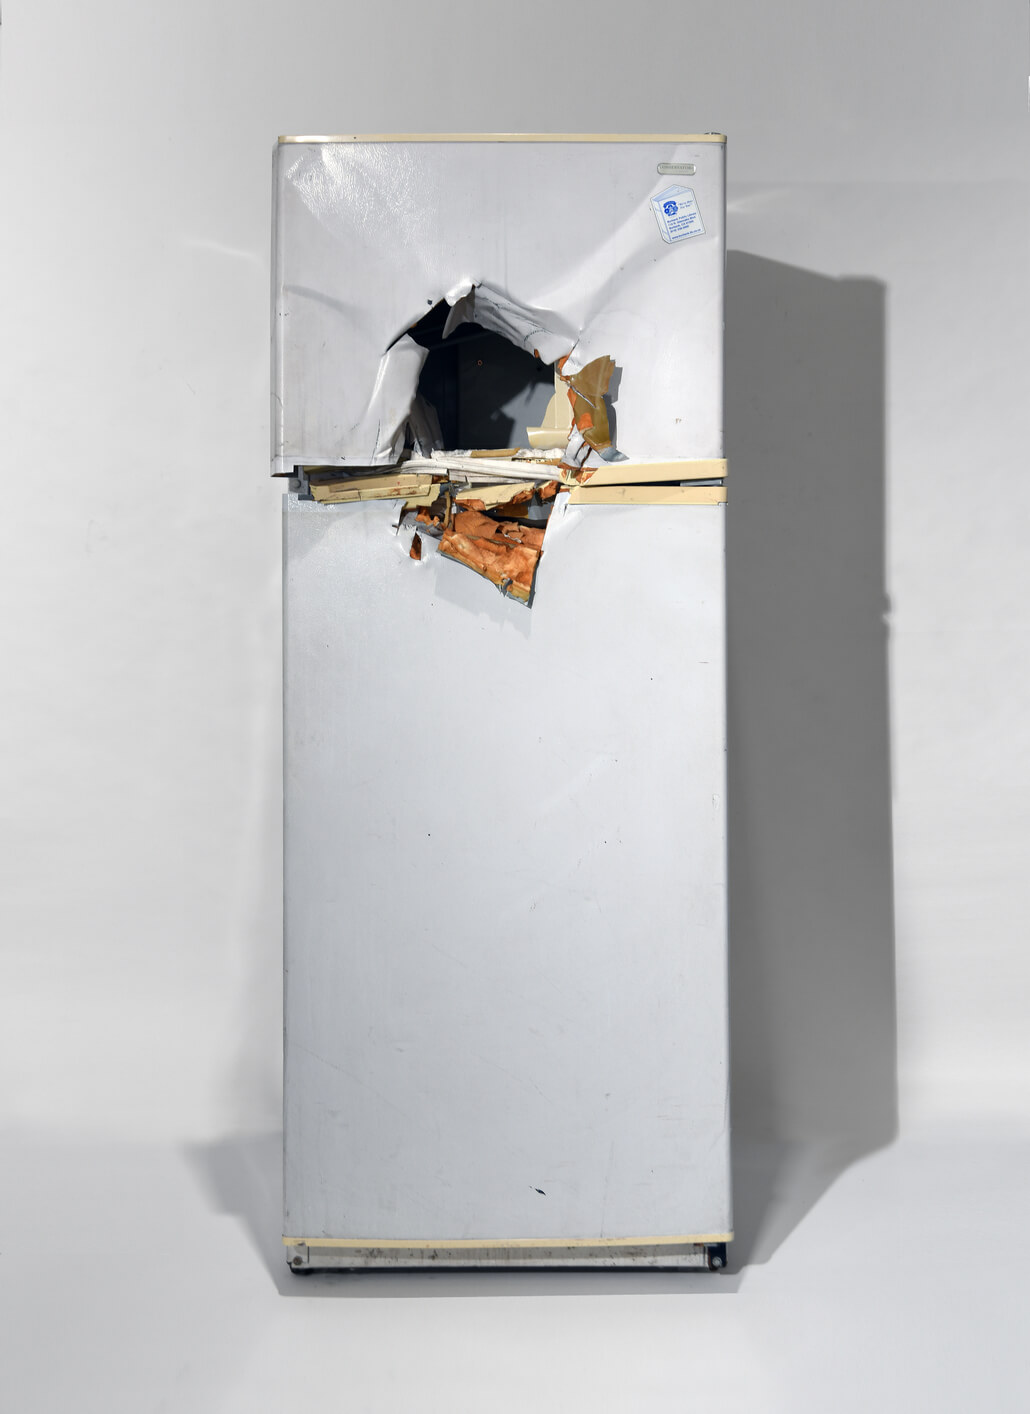 Image of artwork Untitled (refrigerator) by Rodney McMillian